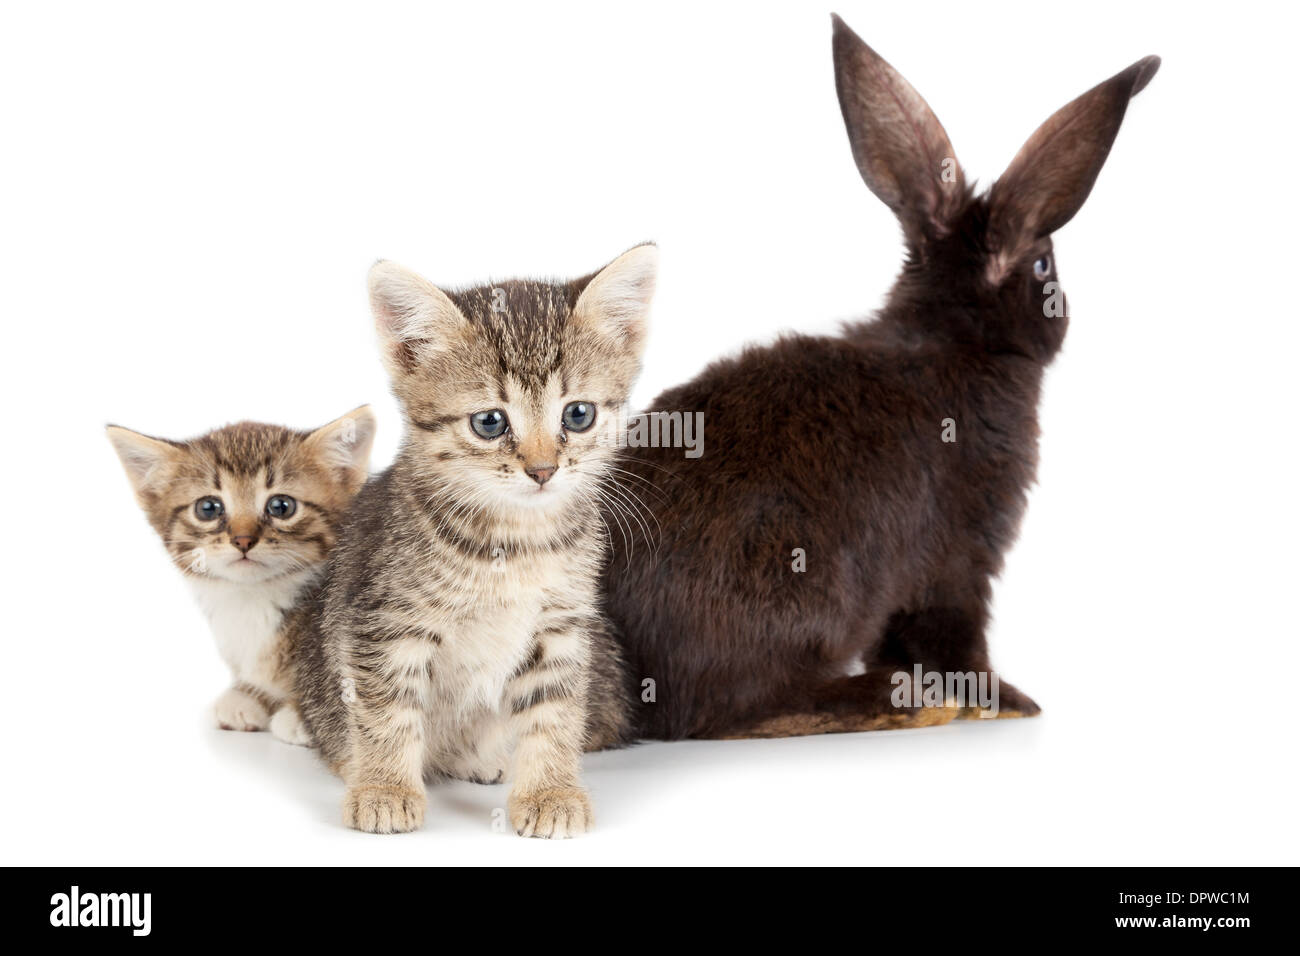 Friendship animals and pets. Kitten and Rabbit in studio isolated on white background. Stock Photo